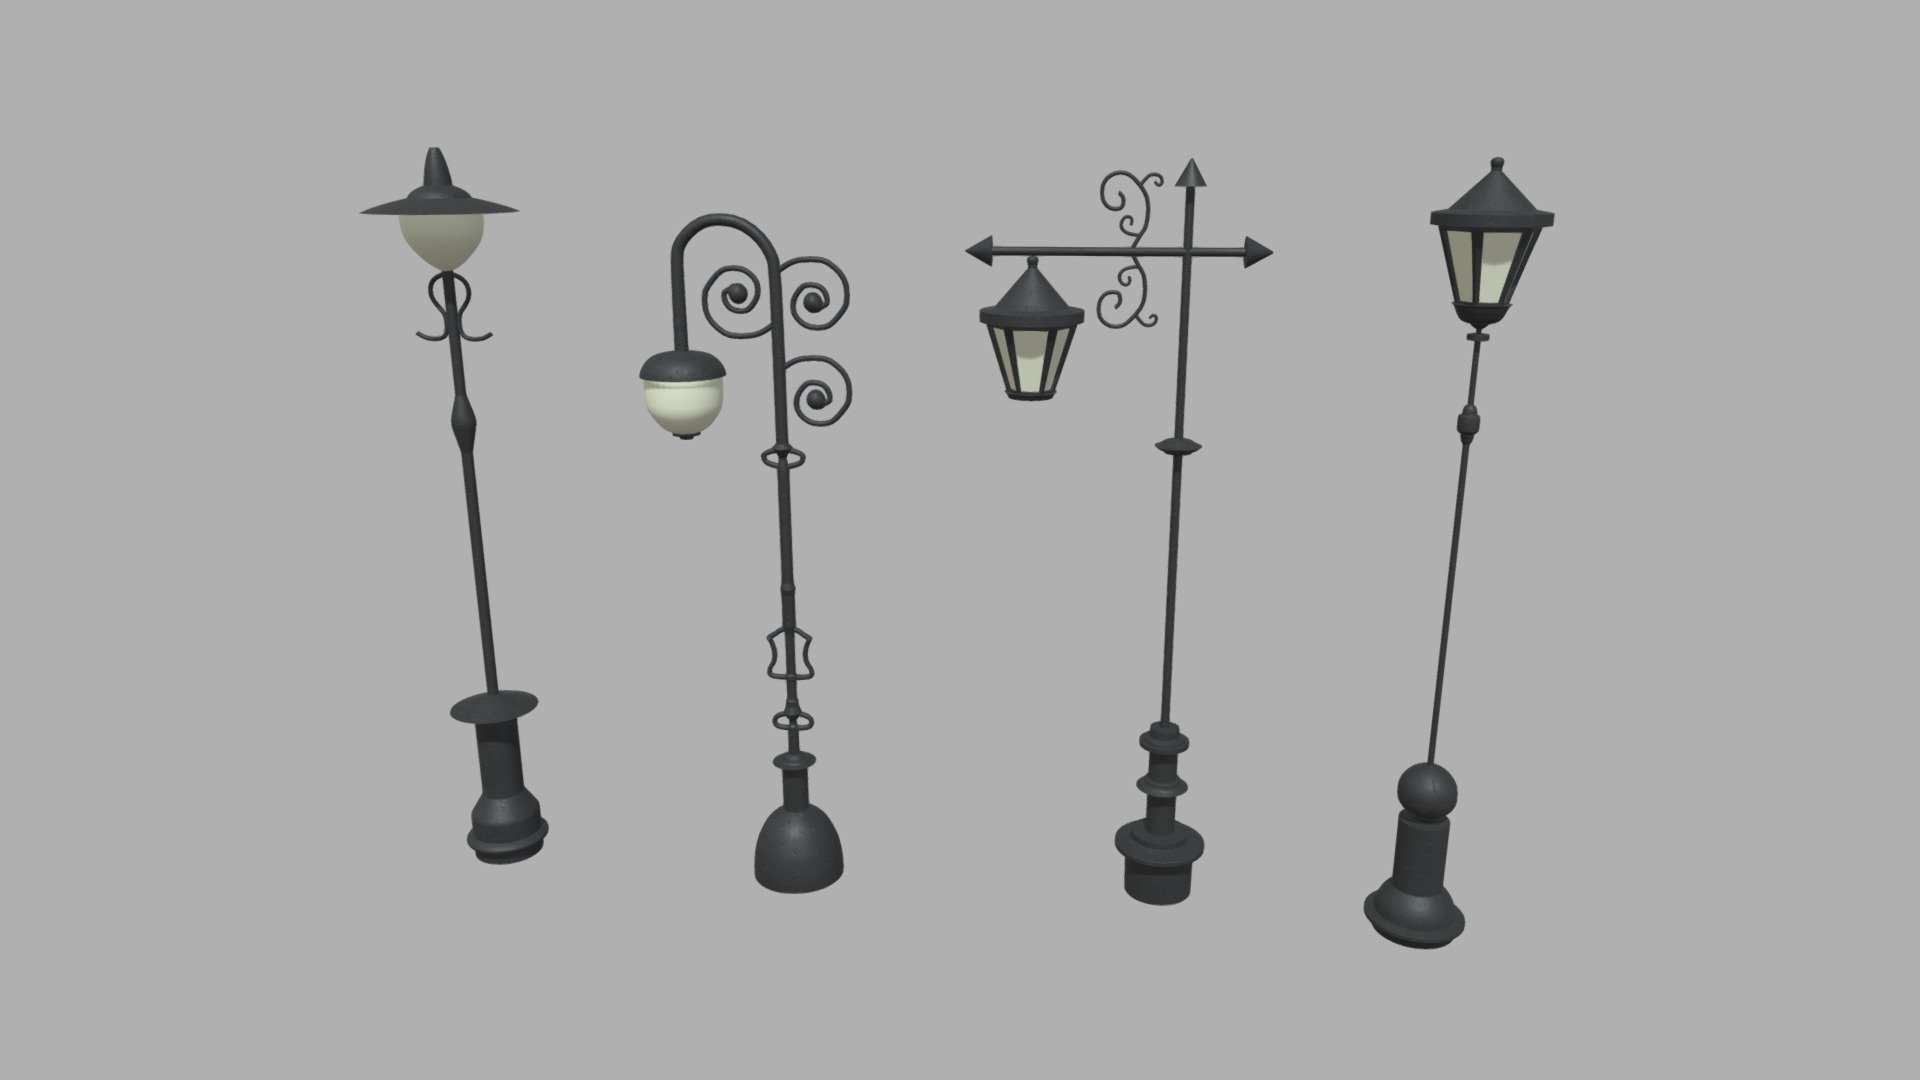 This model contains an Street Lights 011 012 013 014 based on realistic street lights which i modeled in Maya 2018 and texturized in Substance Painter.

The 4 street lights will have textures, fbx, obj, mb, dae, blend and substance file, all in one unique UV.

These models will be part of a huge city elements pack which will be added as a big pack and separately on my profile.

If you need any kind of help contact me, i will help you with everything i can. If you like the model please give me some feedback, I would appreciate it.

Don’t doubt on contacting me, i would be very happy to help. If you experience any kind of difficulties, be sure to contact me and i will help you. Sincerely Yours, ViperJr3D - Street Lights 011 012 013 014 - Buy Royalty Free 3D model by ViperJr3D 3d model